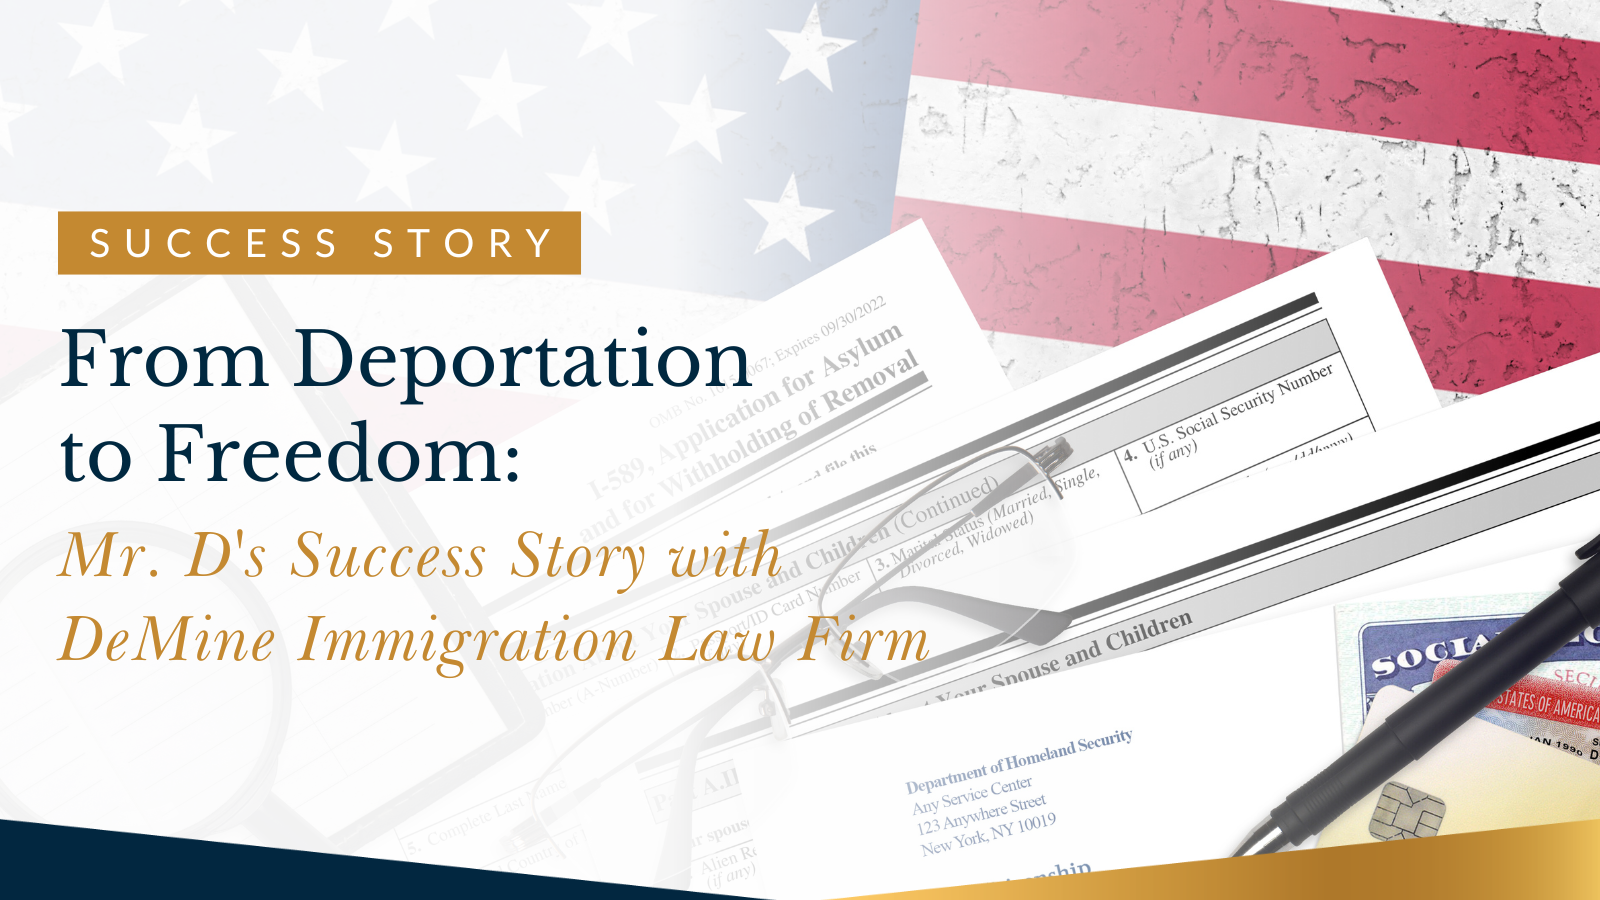 DeMine Immigration Law Firm's Recent Success: A Motion to Reopen Victory!